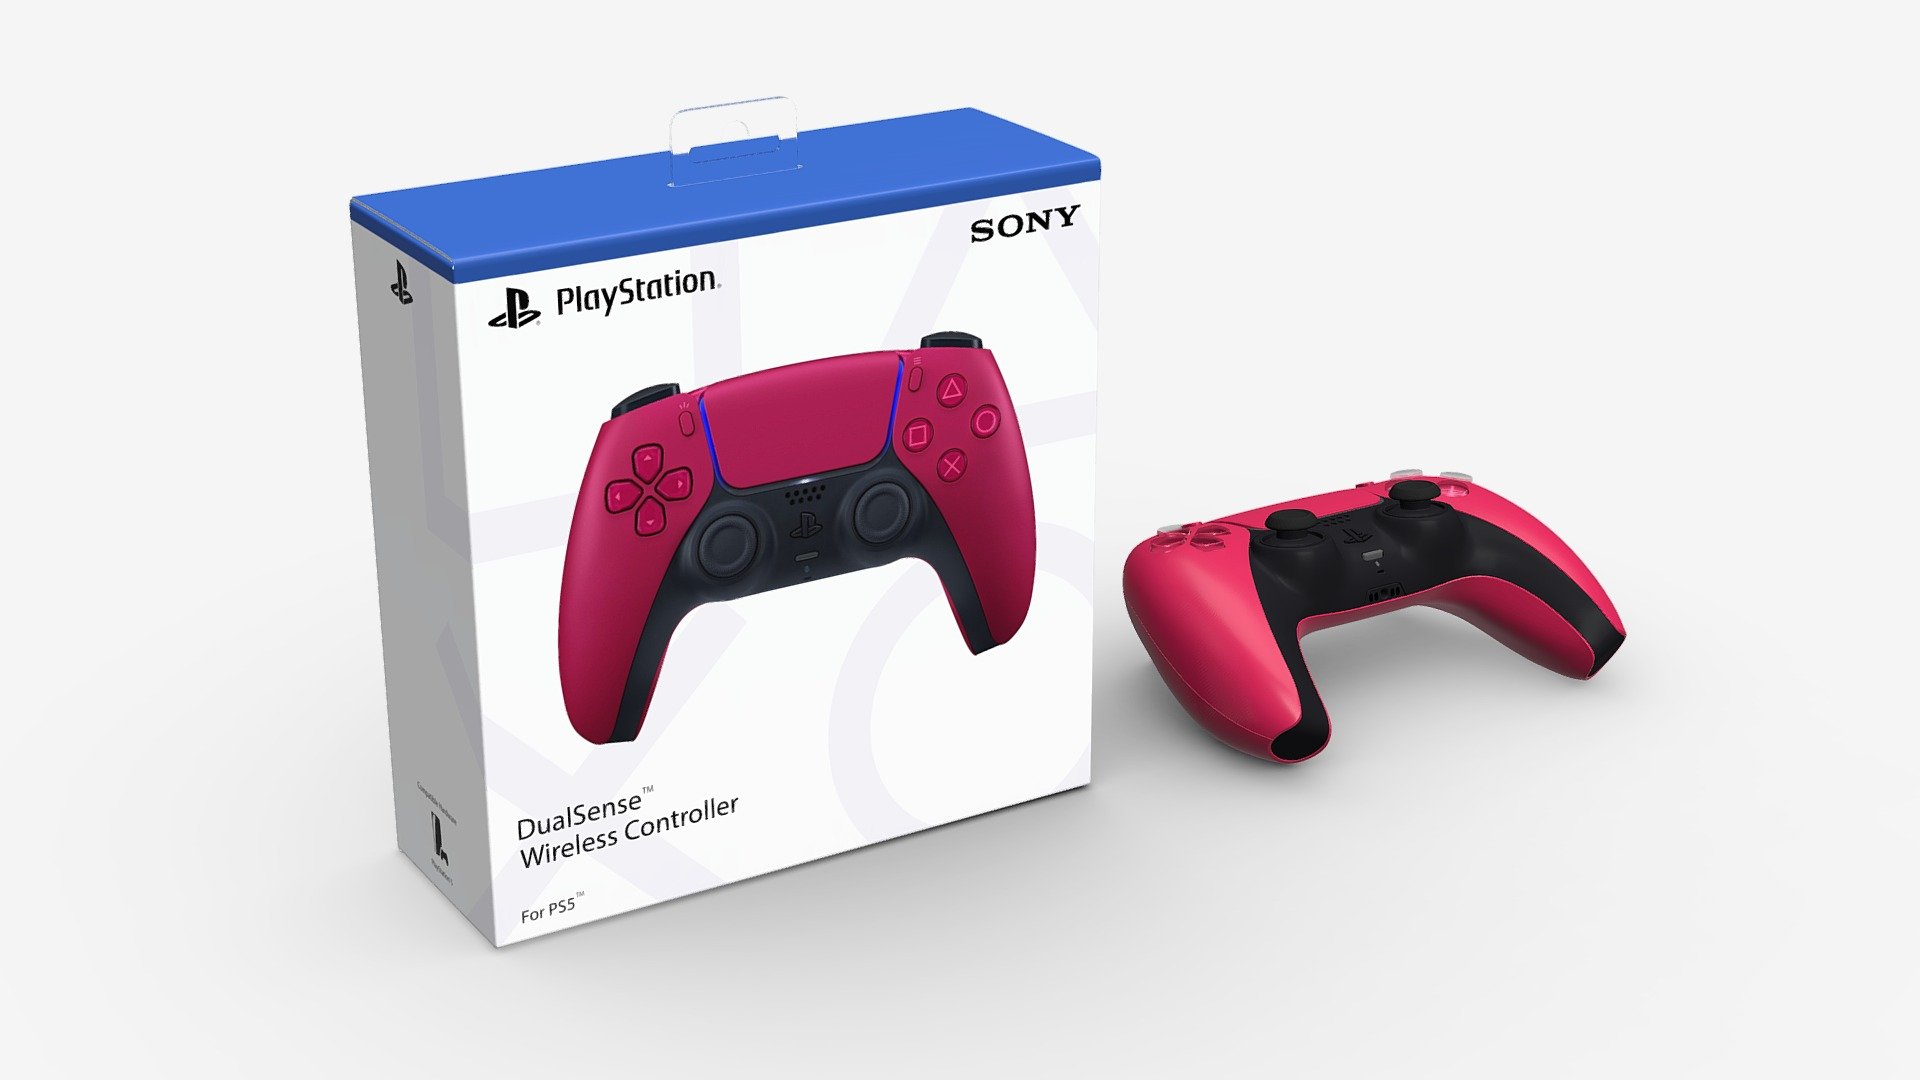 Sony Playstation 5 DualSense cosmic red with box - Buy Royalty Free 3D model by HQ3DMOD (@AivisAstics) 3d model